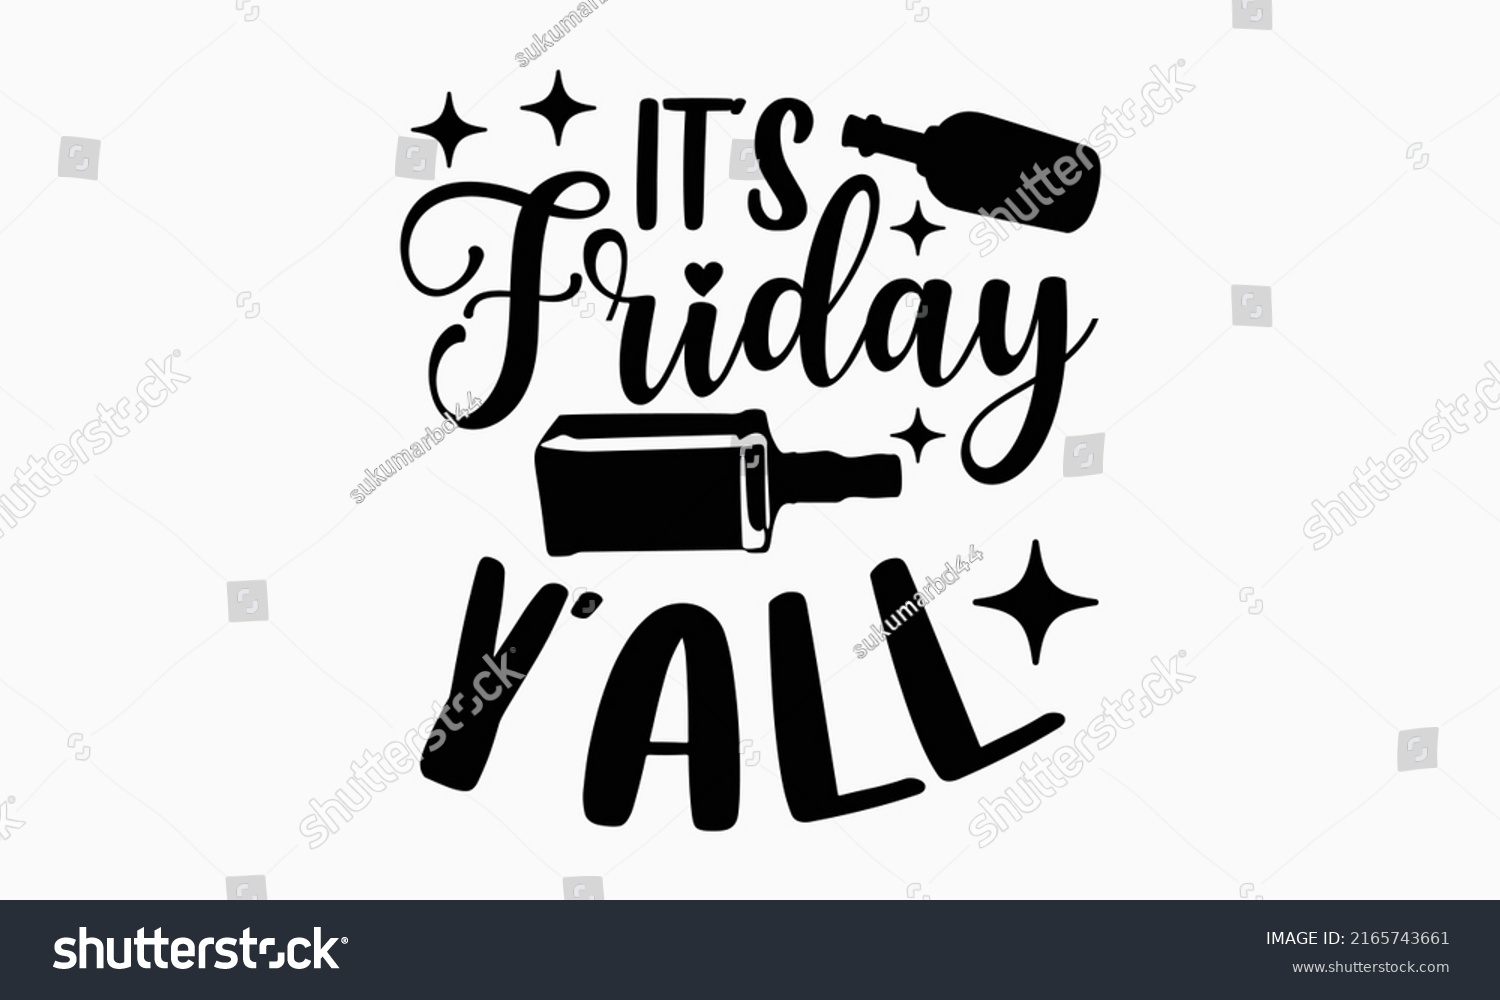 SVG of It’s Friday y’all - Alcohol t shirt design, Hand drawn lettering phrase, Calligraphy graphic design, SVG Files for Cutting Cricut and Silhouette svg